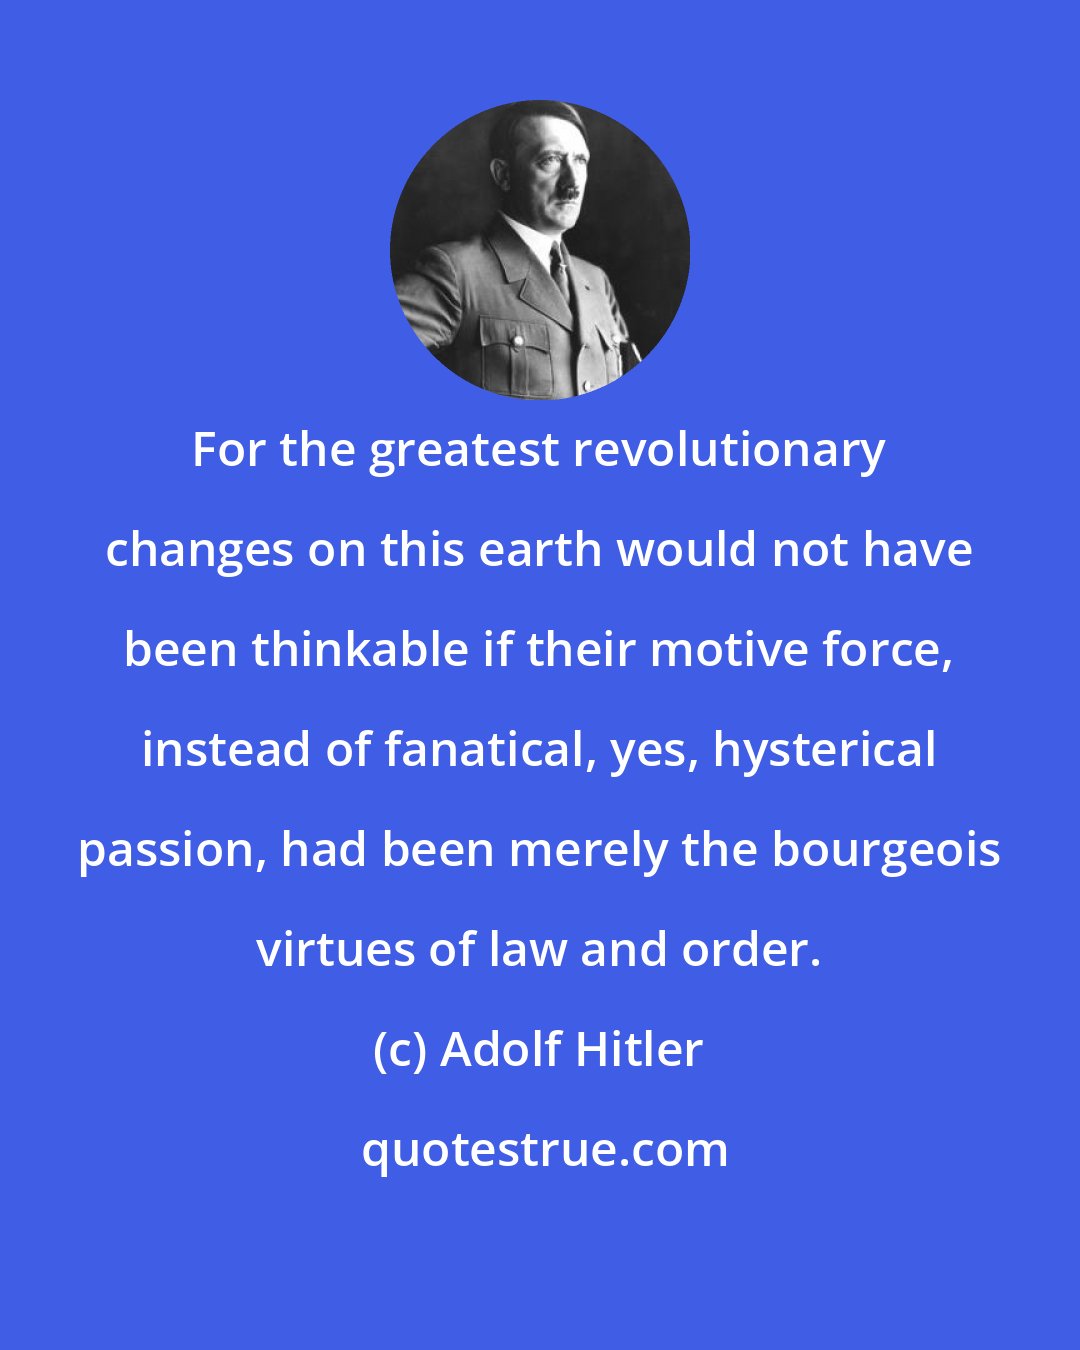 Adolf Hitler: For the greatest revolutionary changes on this earth would not have been thinkable if their motive force, instead of fanatical, yes, hysterical passion, had been merely the bourgeois virtues of law and order.